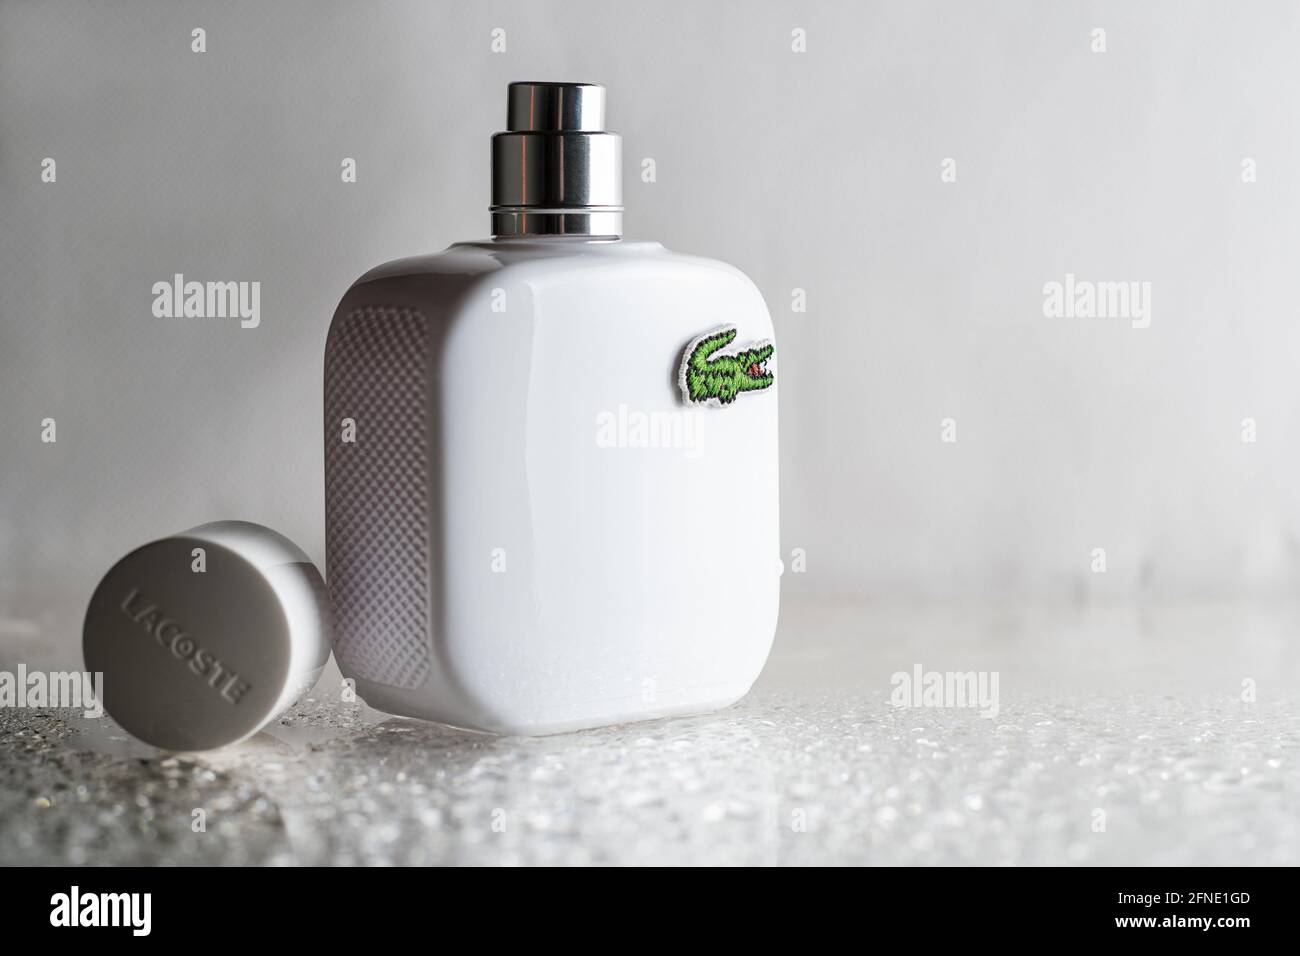 Minsk, Belarus 07.05.2021: White open perfume bottle with Lacoste logo on wet surface, with drops on white background Stock Photo